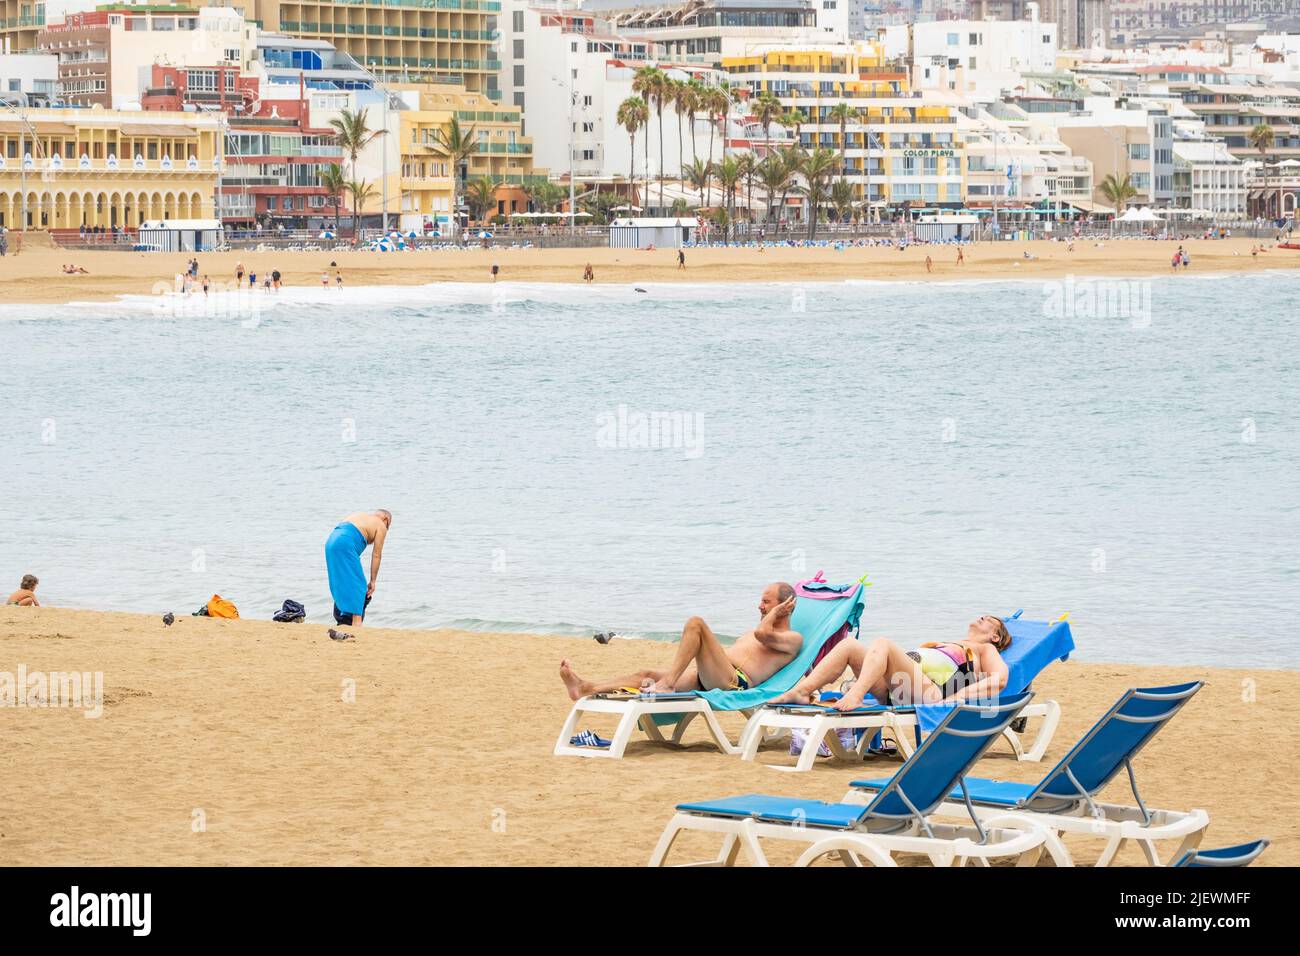 Las Palmas, Gran Canaria, Canary Islands, Spain. 28th June, 2022. Tourists, many from the UK, bask on the city beach in Las Palmas on Gran Canaria. Credit: Alan Dawson/ Alamy Live News. Stock Photo